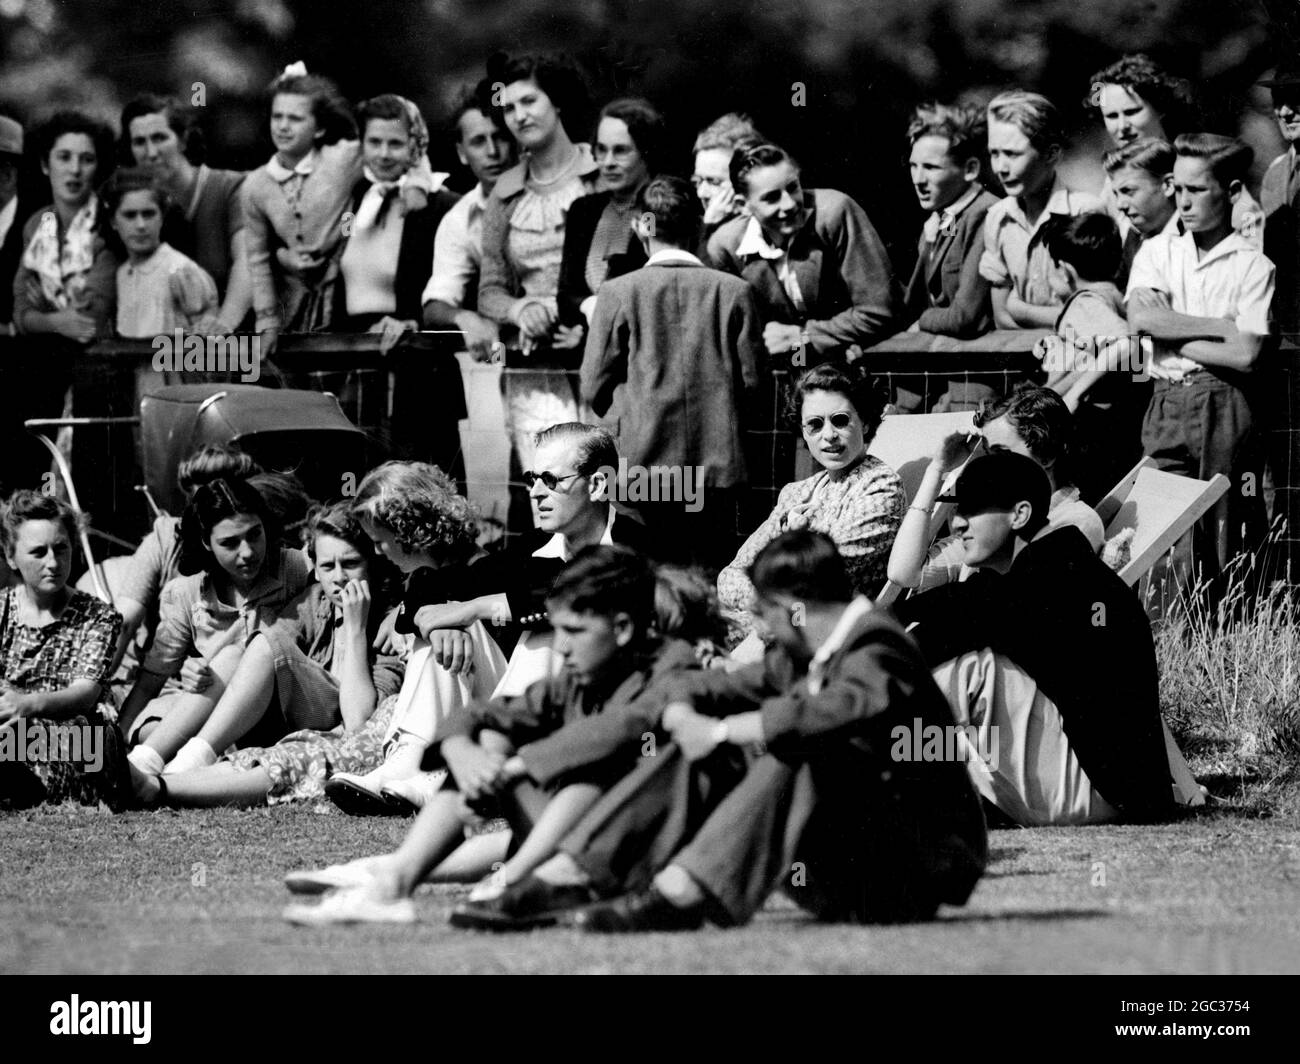 Royal Spectators Watch Village Cricket Match Seated among the spectators at the village cricket field at Mersham-le-Hatch, near Ashford, Kent, are the Duke of Edinburgh (on ground wearing sun-glasses), Princess Elizabeth (in deck chair beside him), Lady Brabourne (right, in deck chair) and Lord Brabourne (on ground beside her). The Duke was waiting to bat for Mersham in a match against the neighbouring village of Aldington. He was out l.b.w. to the first ball he received, but he took three of the Aldington wickets for 27 runs. The Duke's team won by 38 runs. The Duke and Princess Elizabeth wer Stock Photo